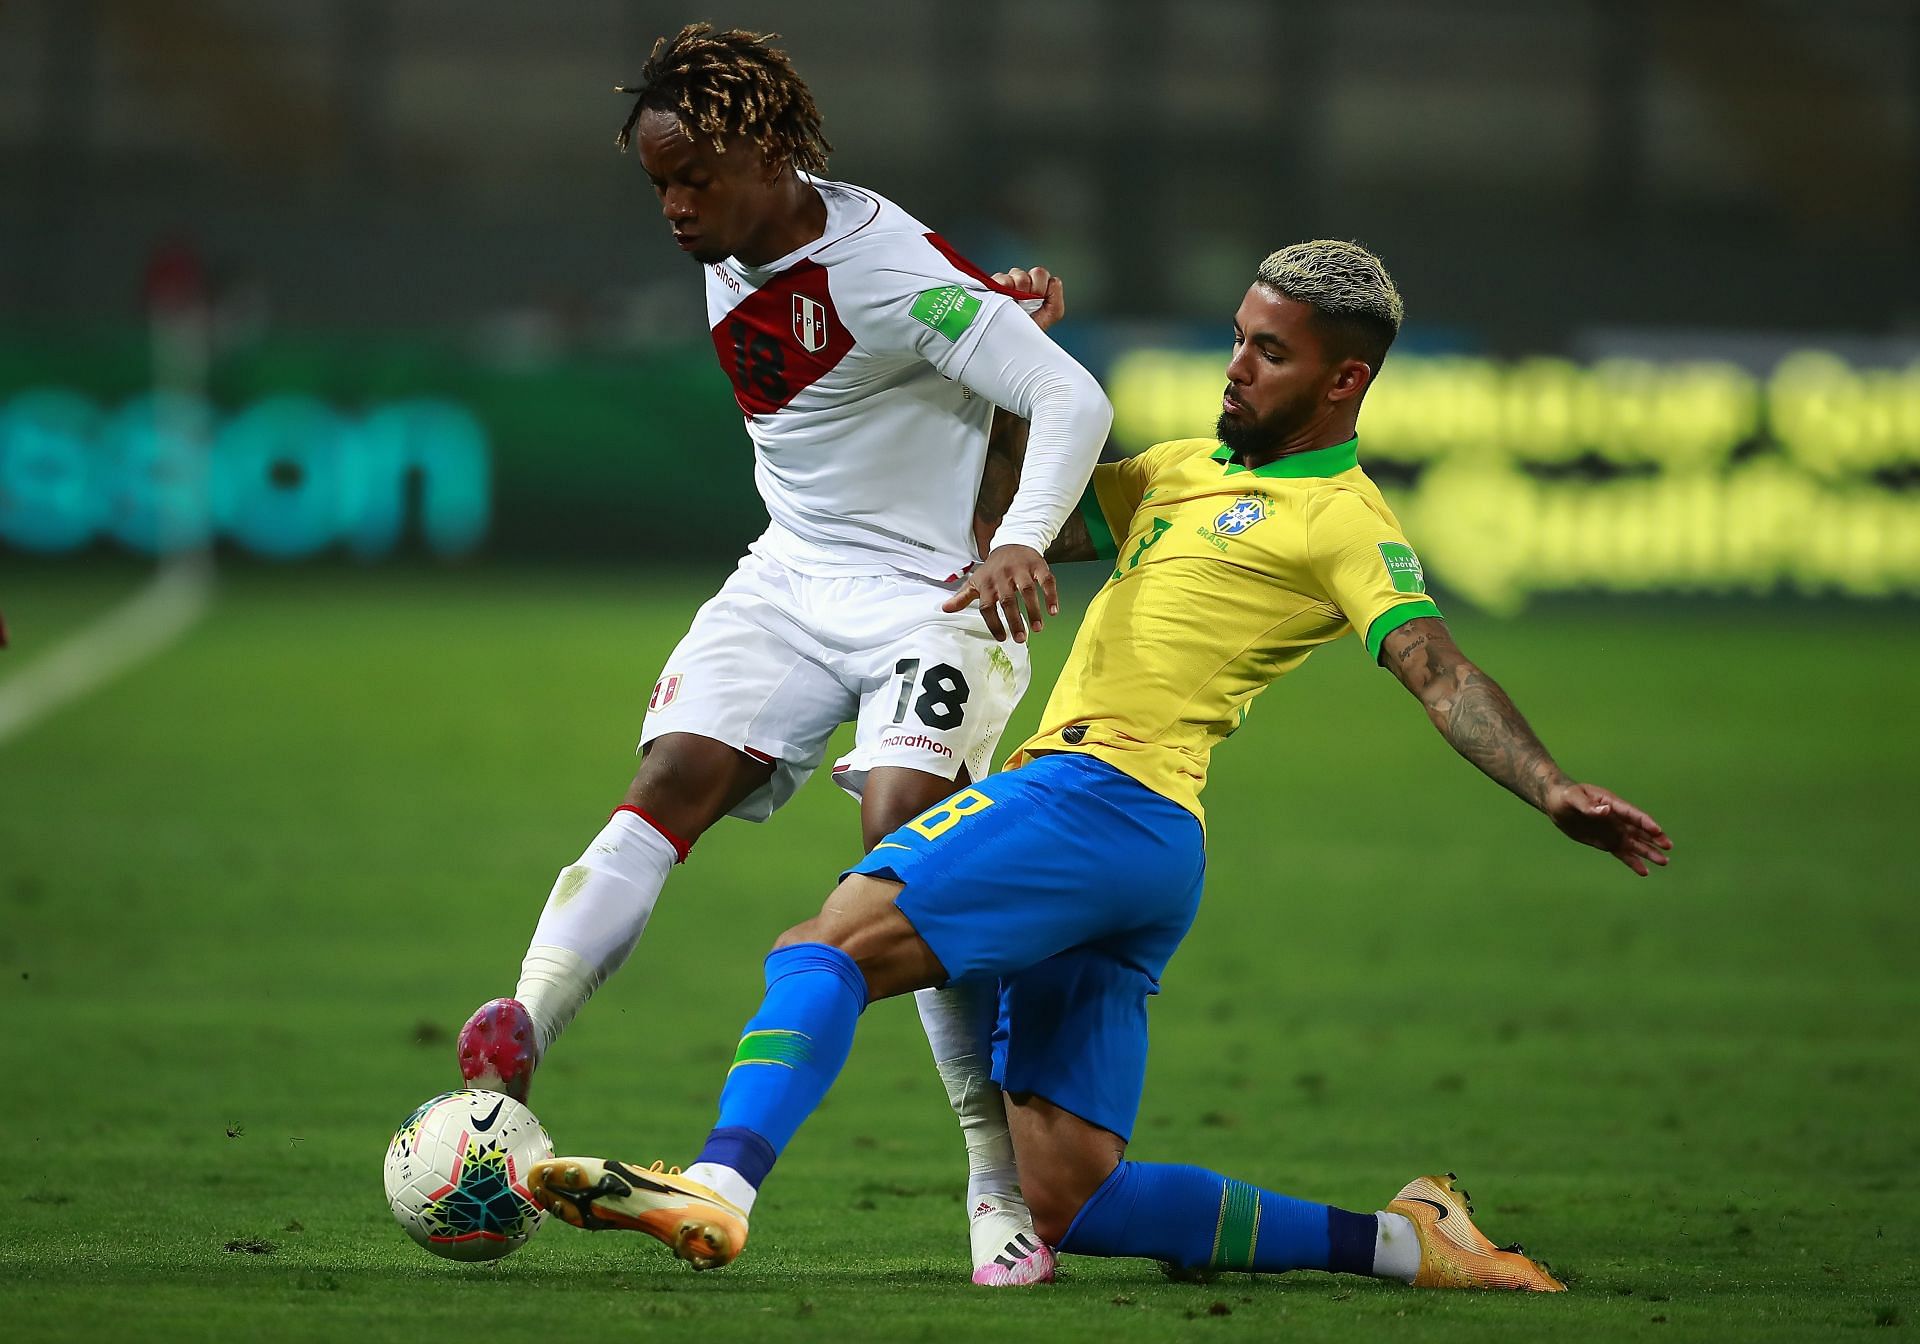 Peru v Brazil - South American Qualifiers for Qatar 2022 (Photo by Daniel Apuy/Getty Images)